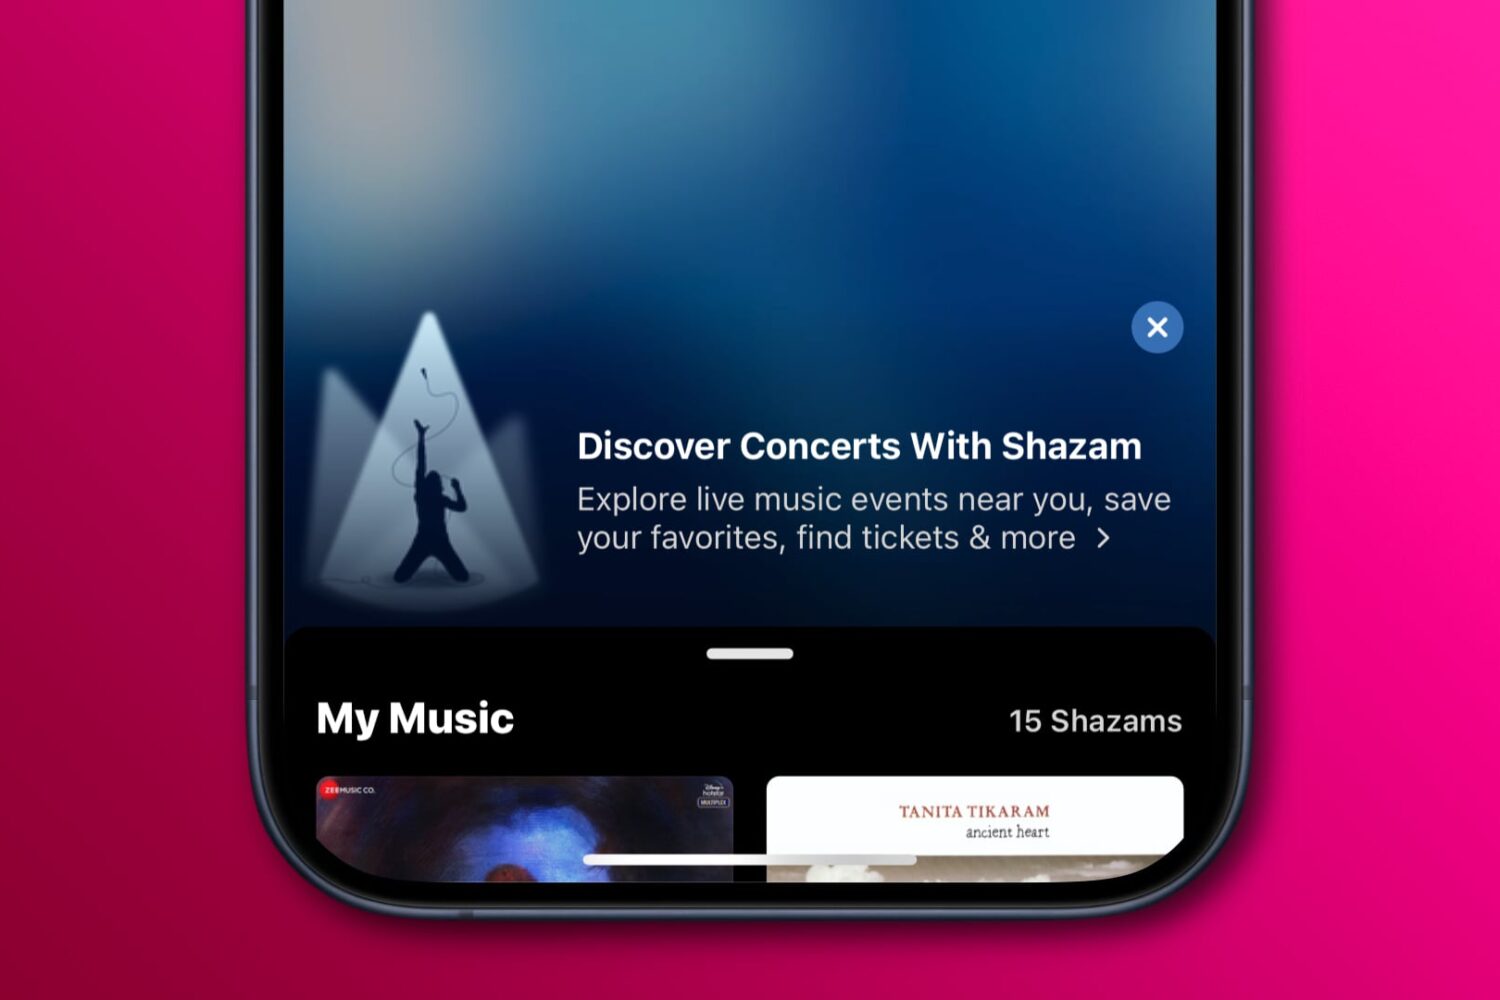 Shazam for iPhone showing a tooltip about the Concert feature